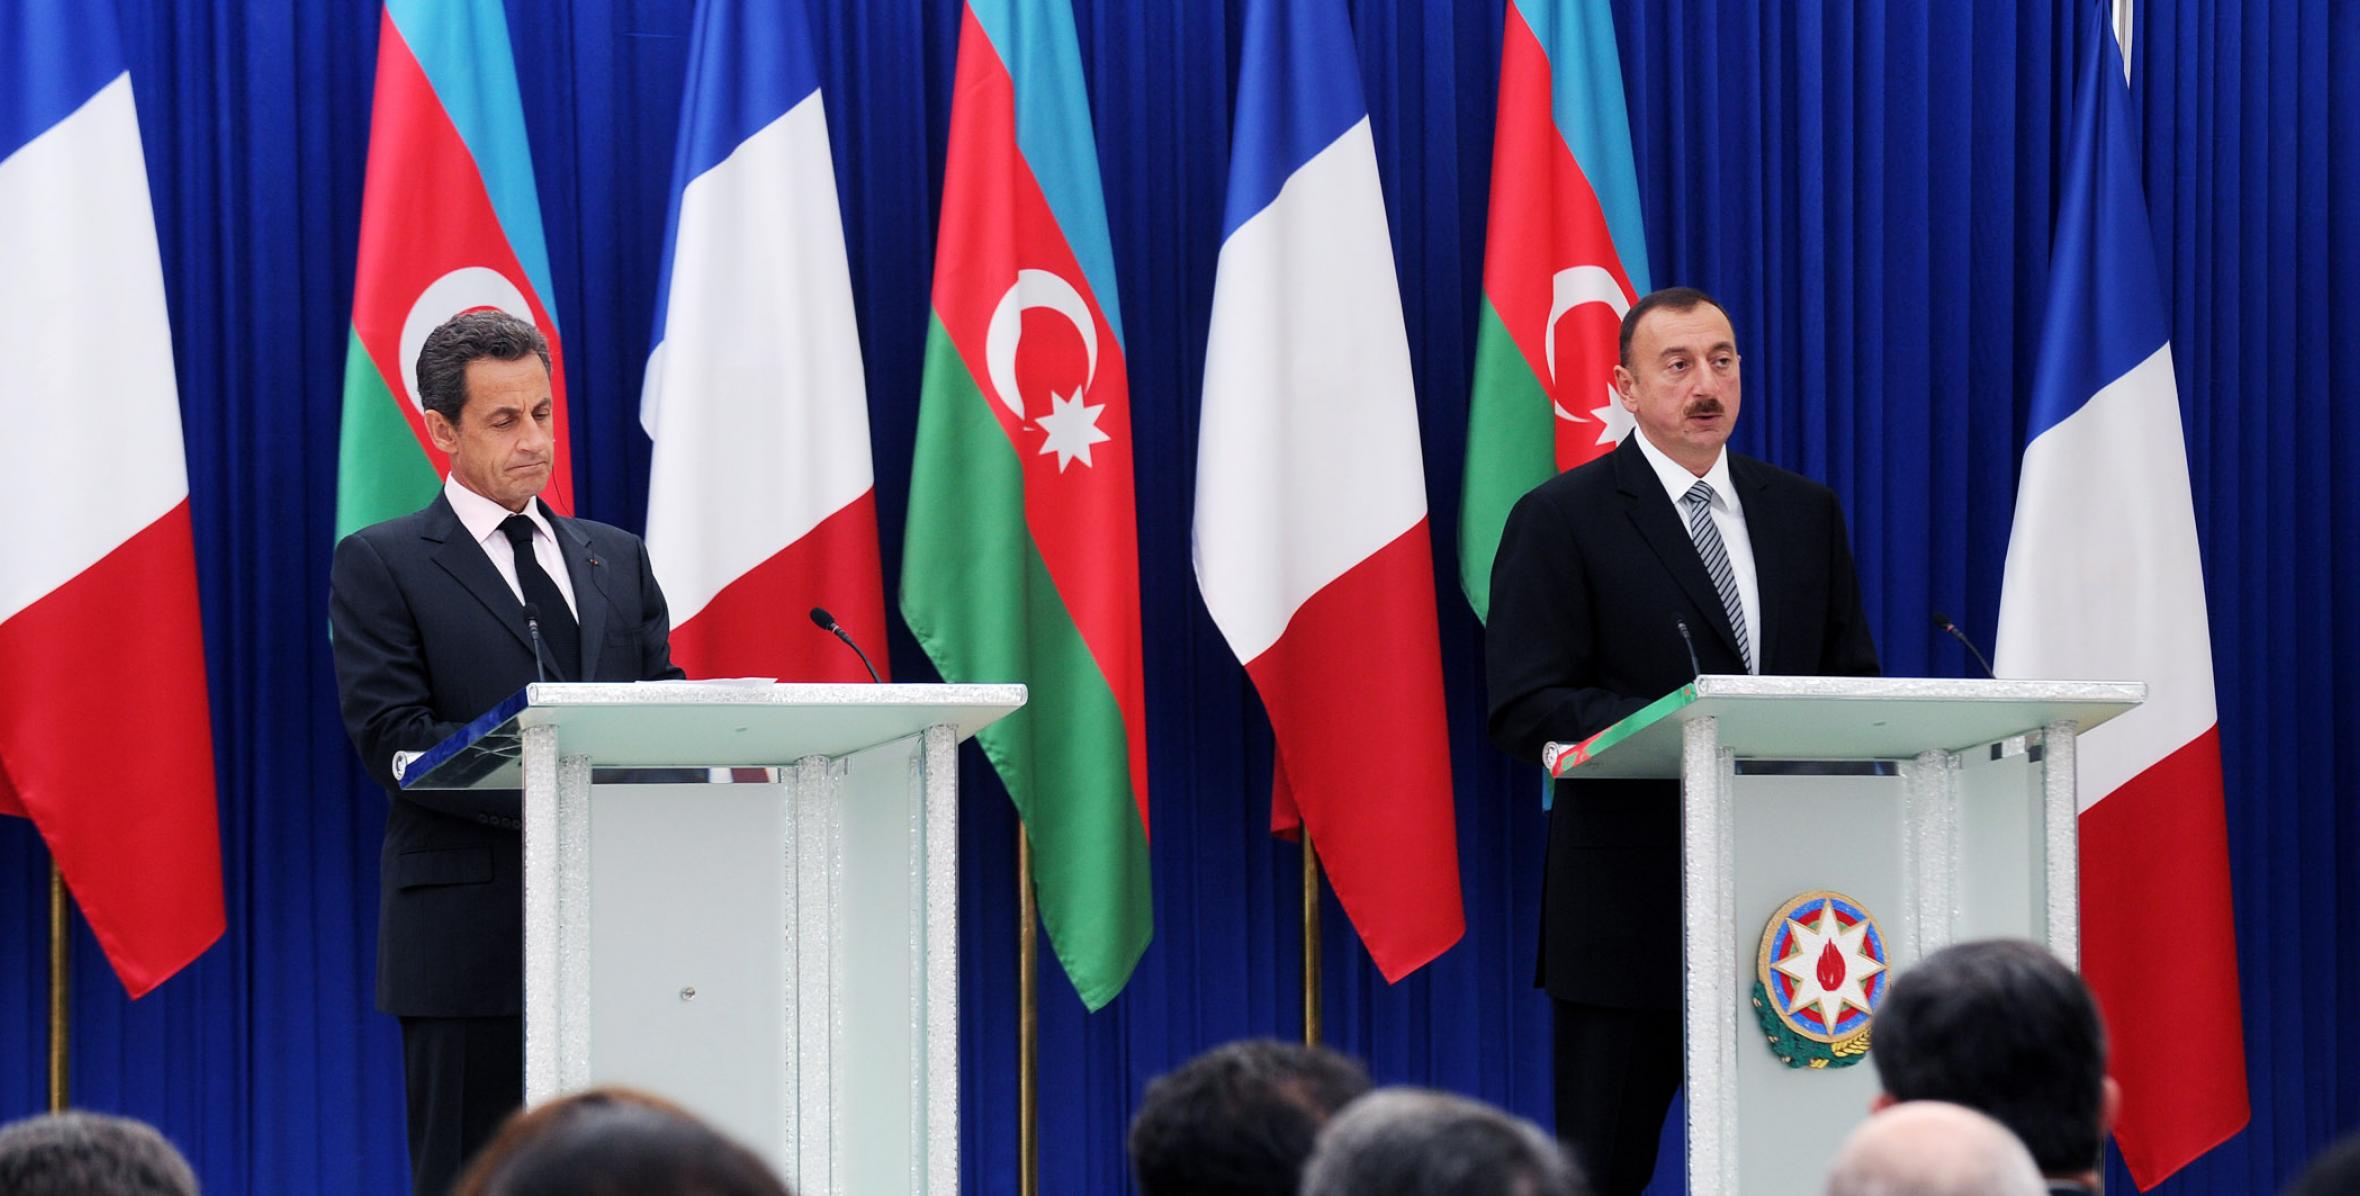 Speech by Ilham Aliyev at the foundation-laying ceremony for the French Lyceum in Baku